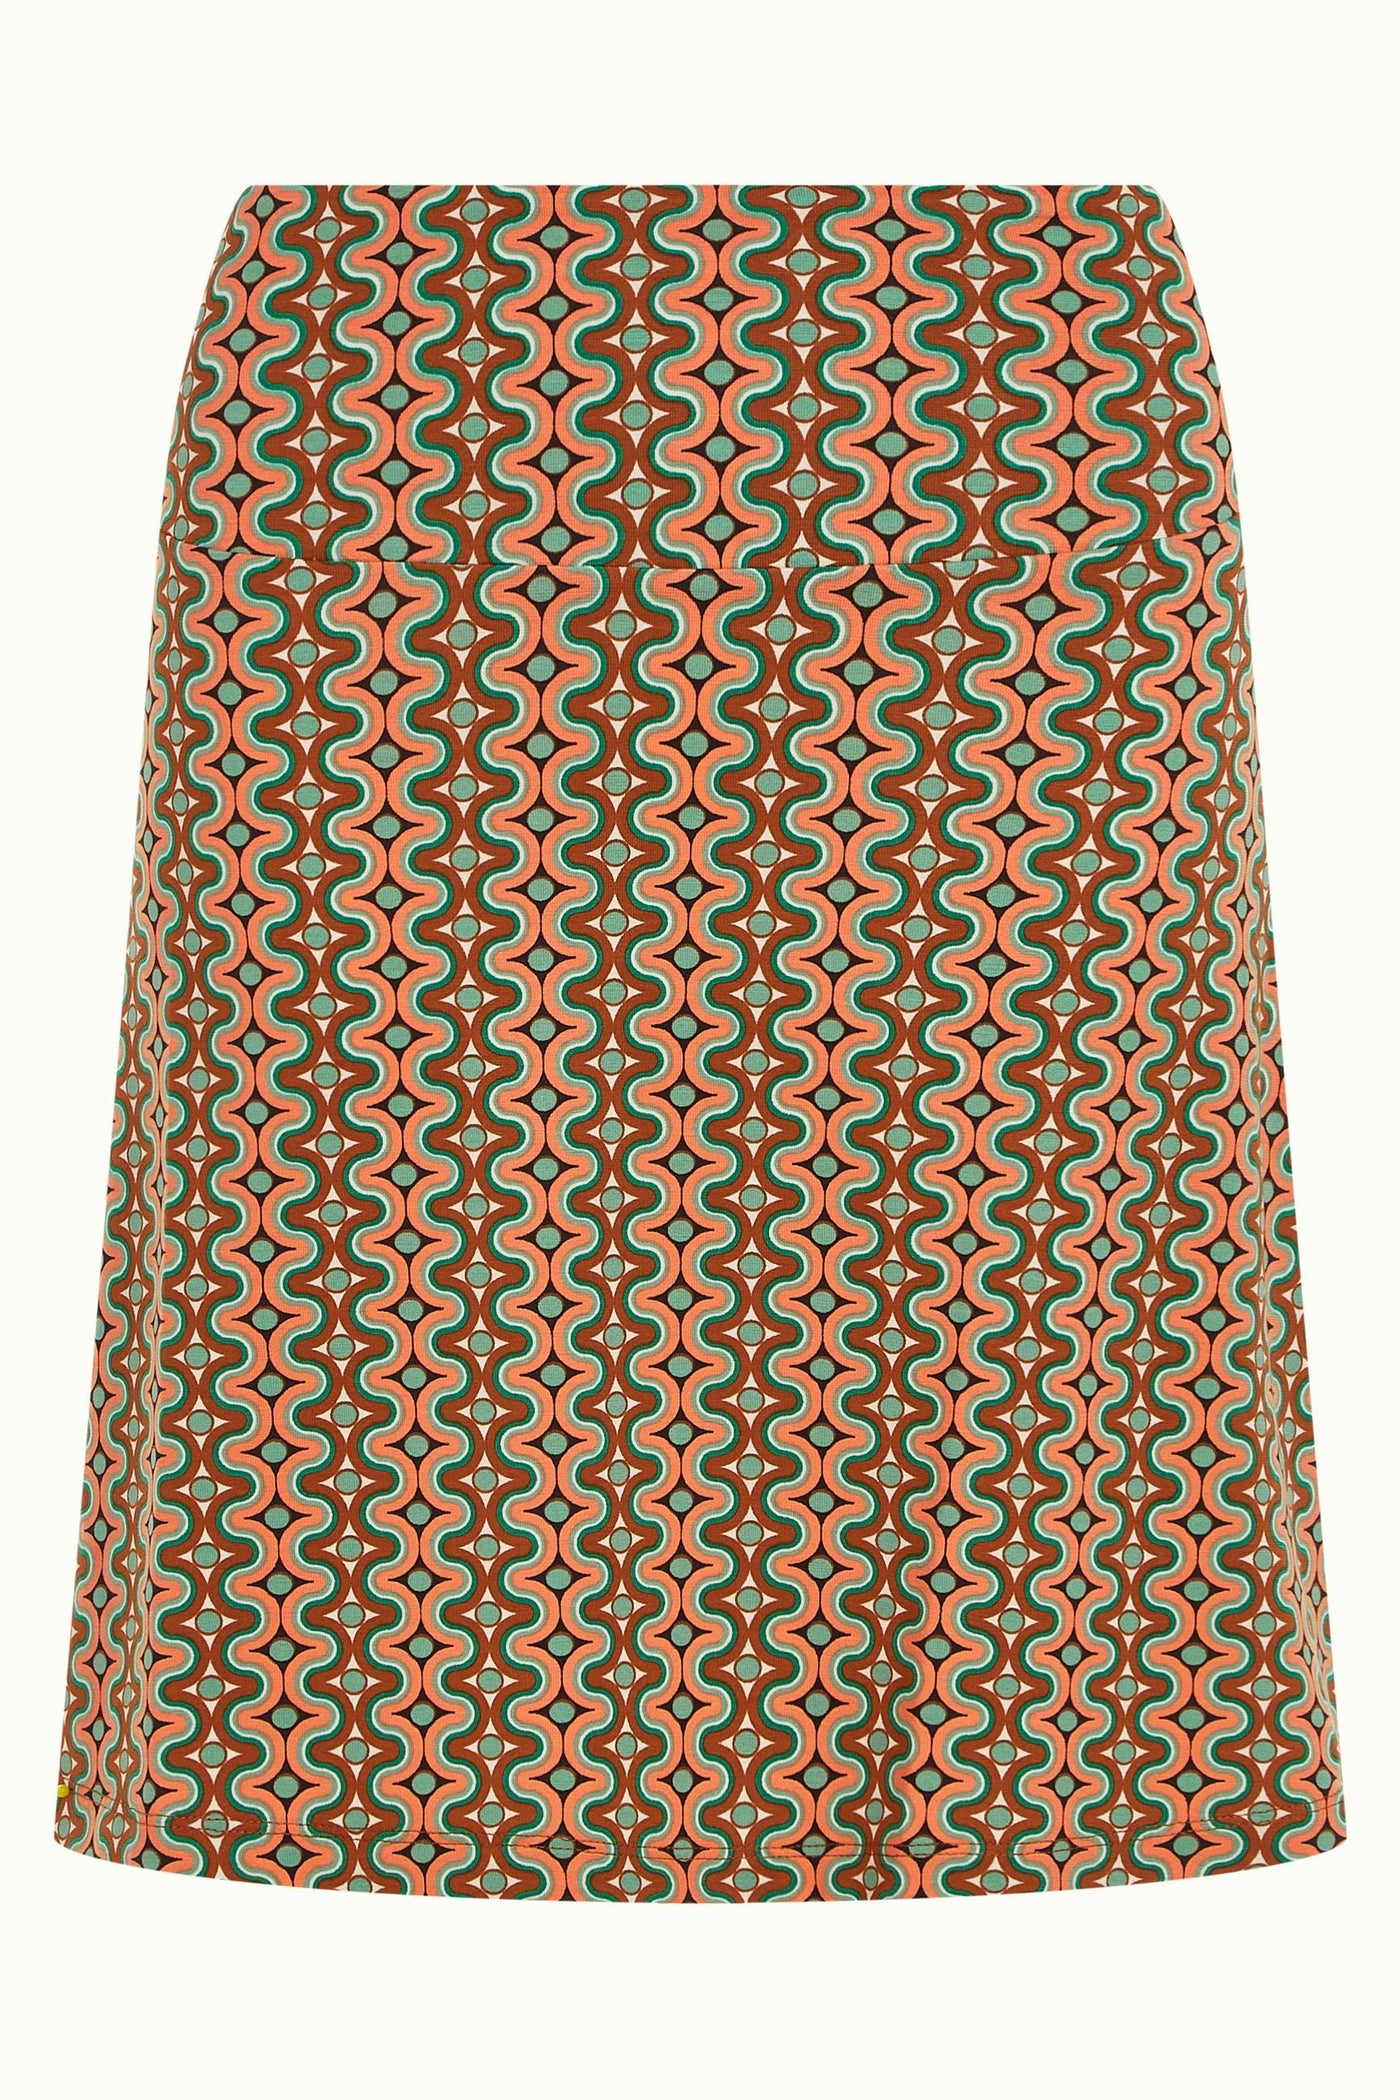 King Louie Border Skirt Twisted